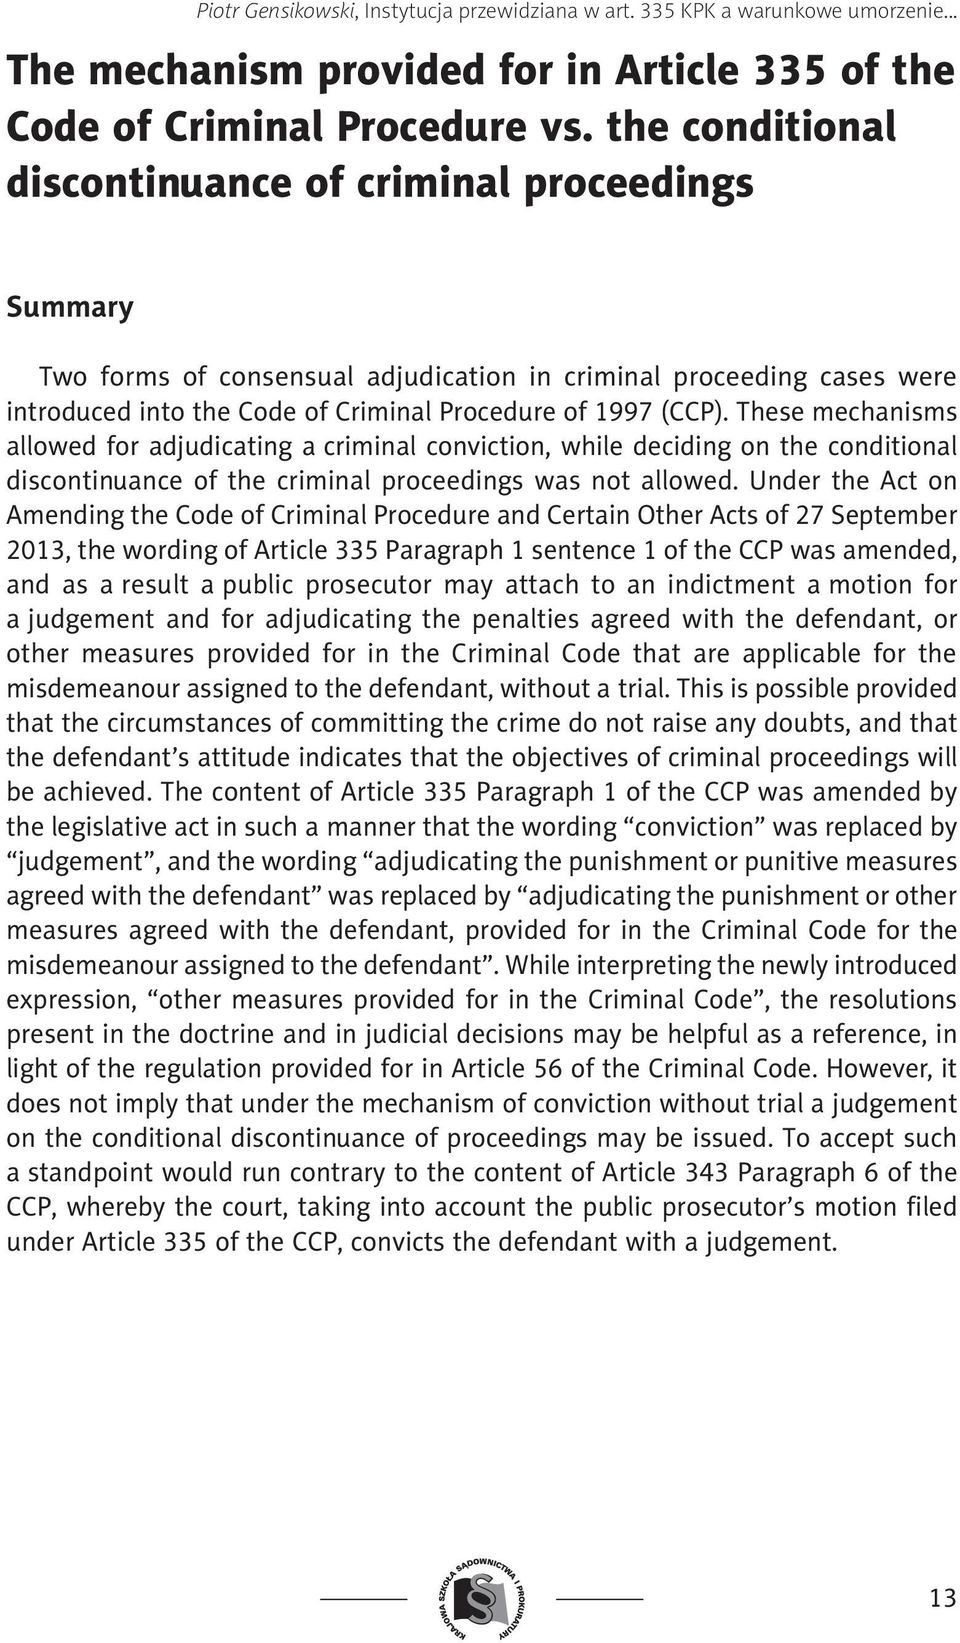 These mechanisms allowed for adjudicating a criminal conviction, while deciding on the conditional discontinuance of the criminal proceedings was not allowed.